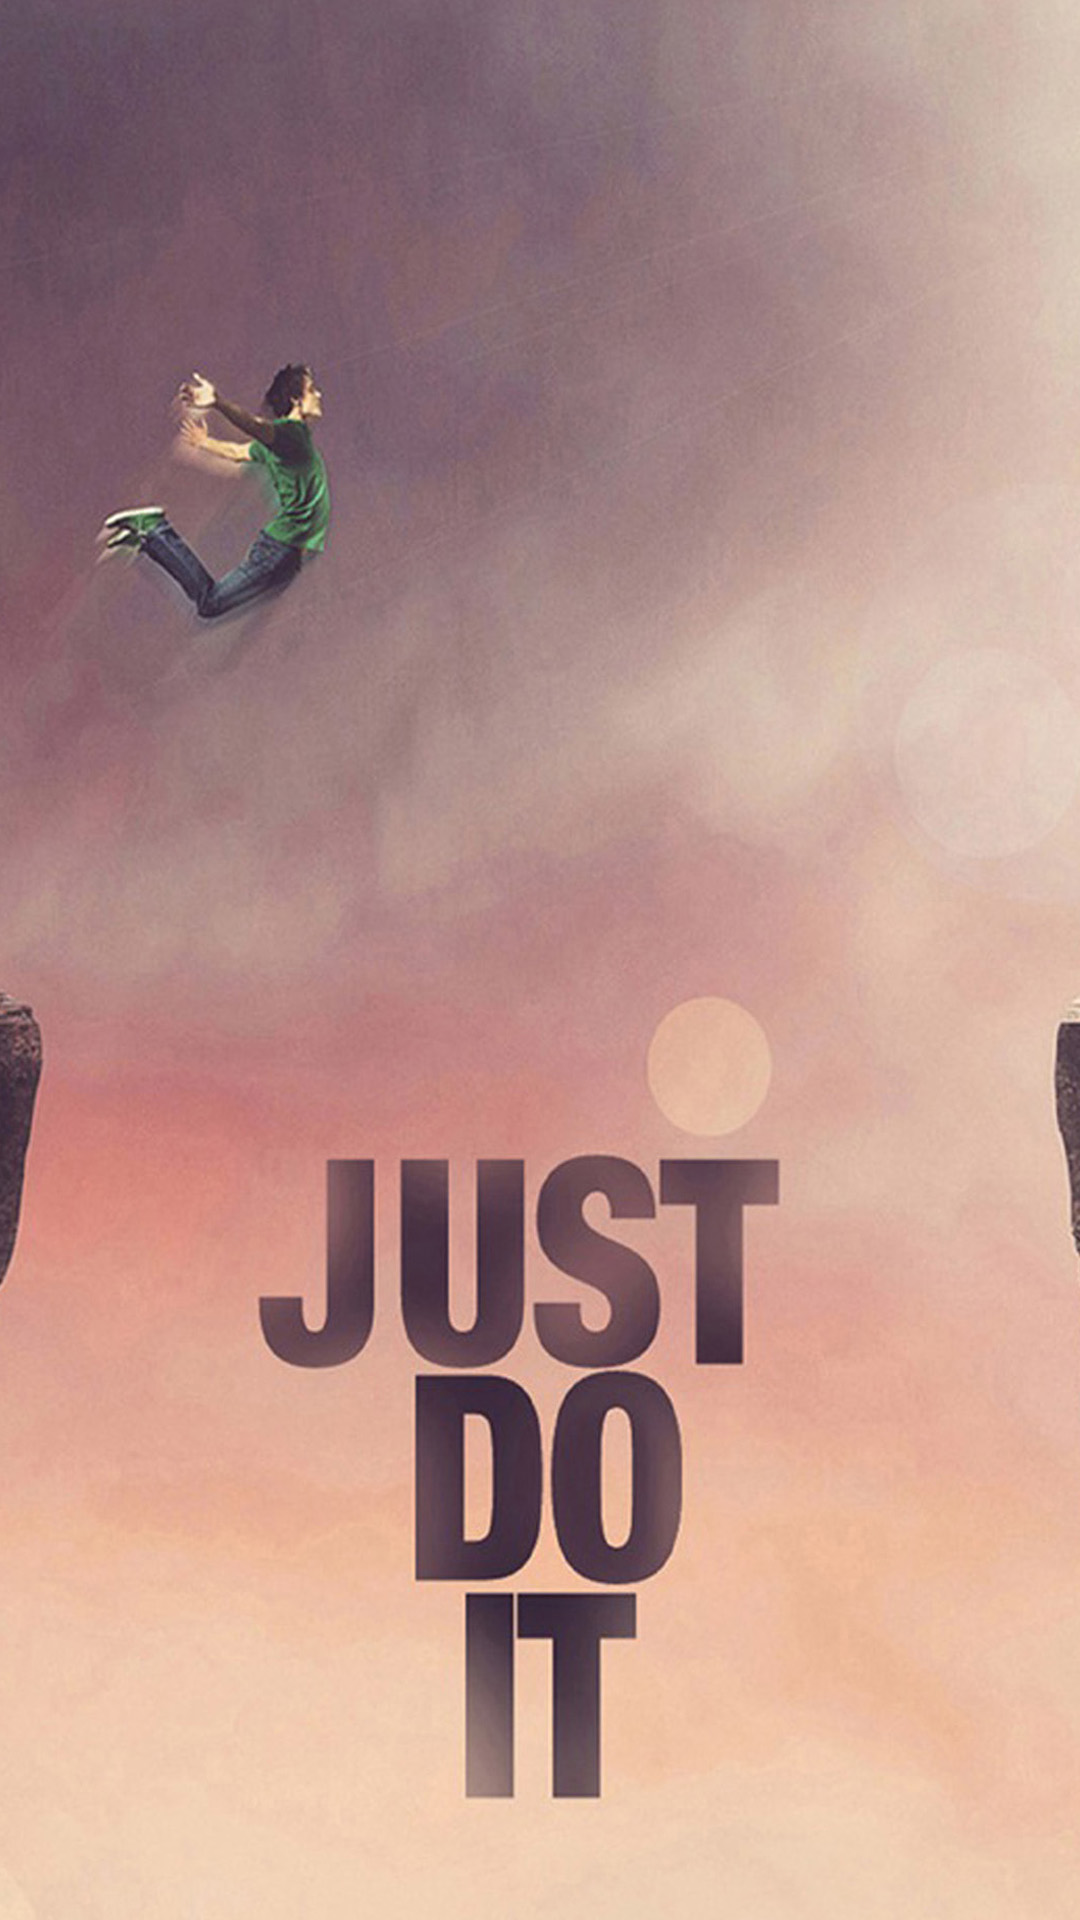 Just Do It ナイキのスマホ壁紙 Iphone Wallpapers